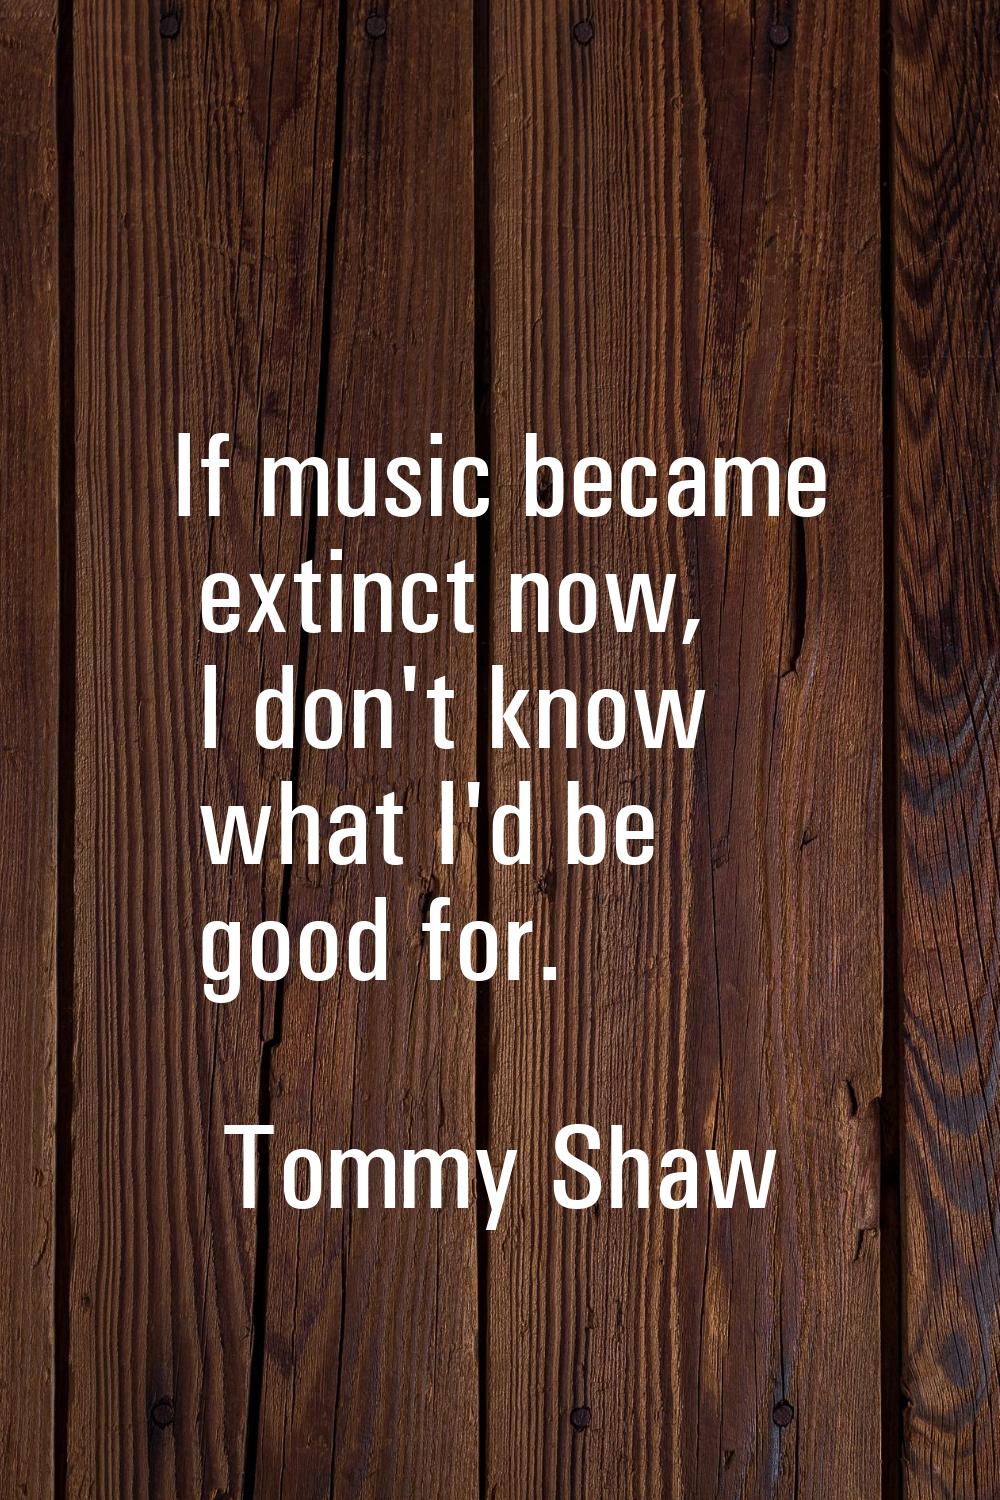 If music became extinct now, I don't know what I'd be good for.